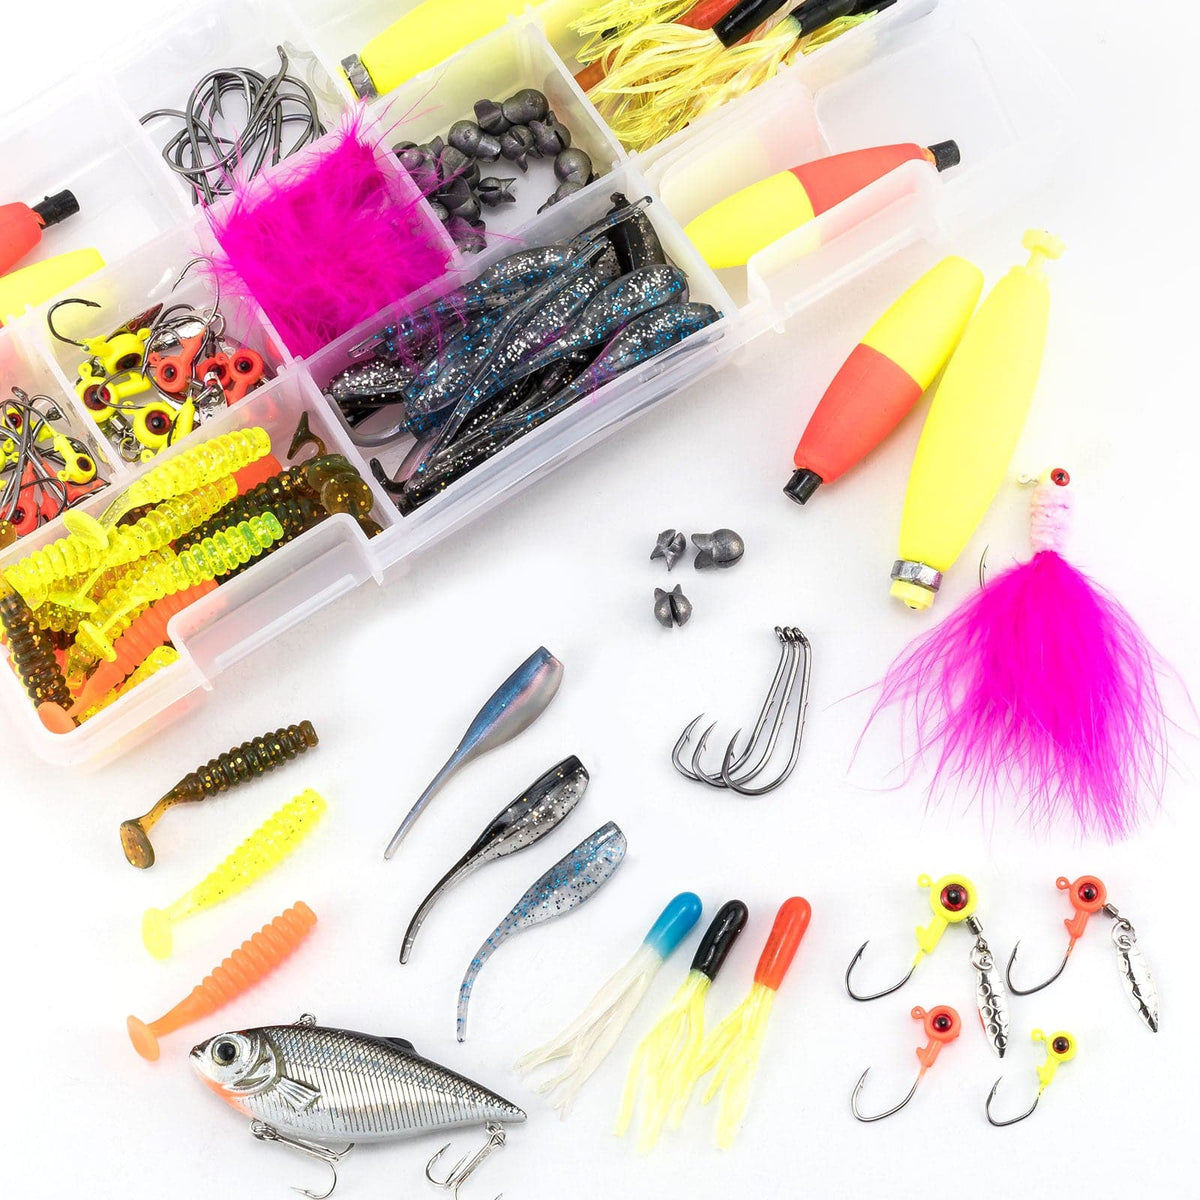 lures crappie fishing, lures crappie fishing Suppliers and